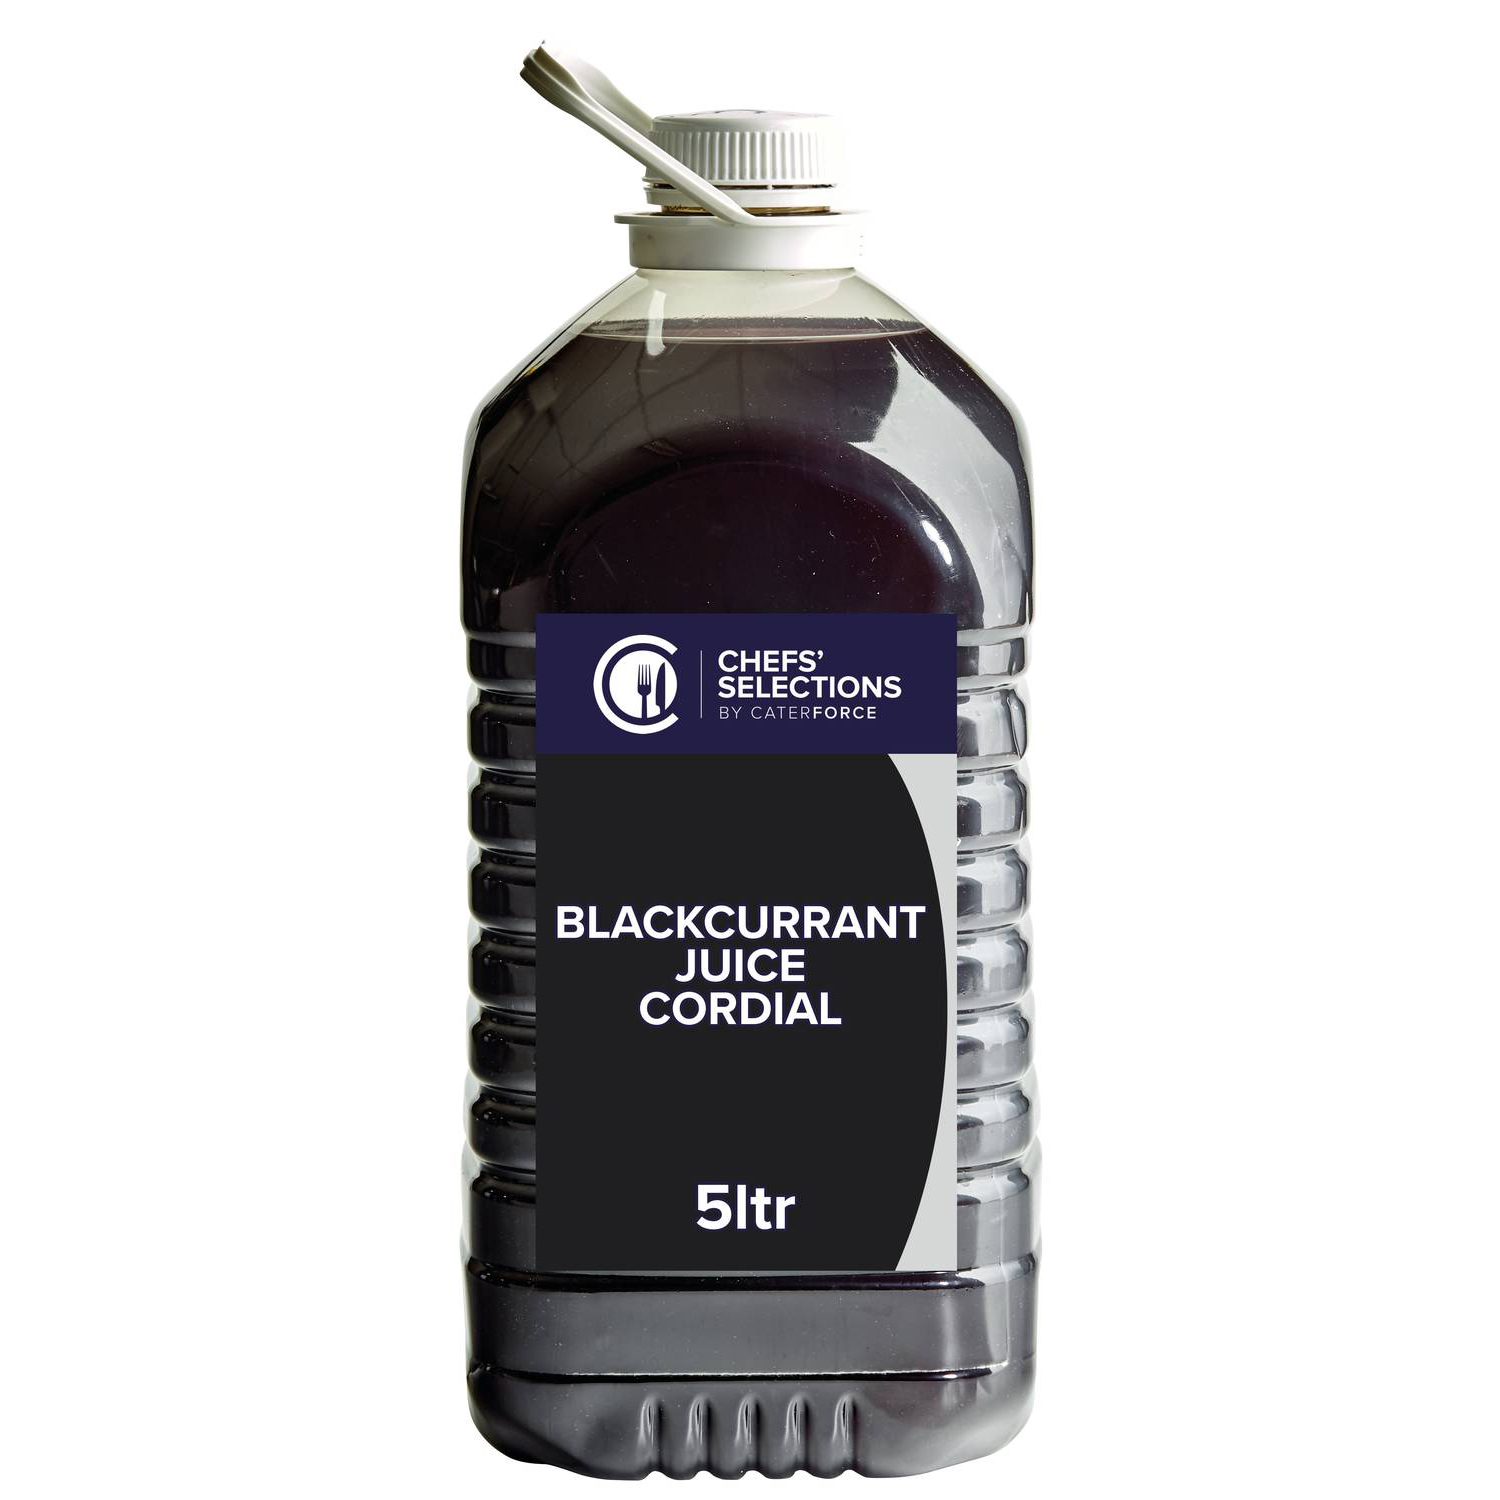 Chefs’ Selections Blackcurrant Juice Cordial No Added Sugar (2 x 5L)